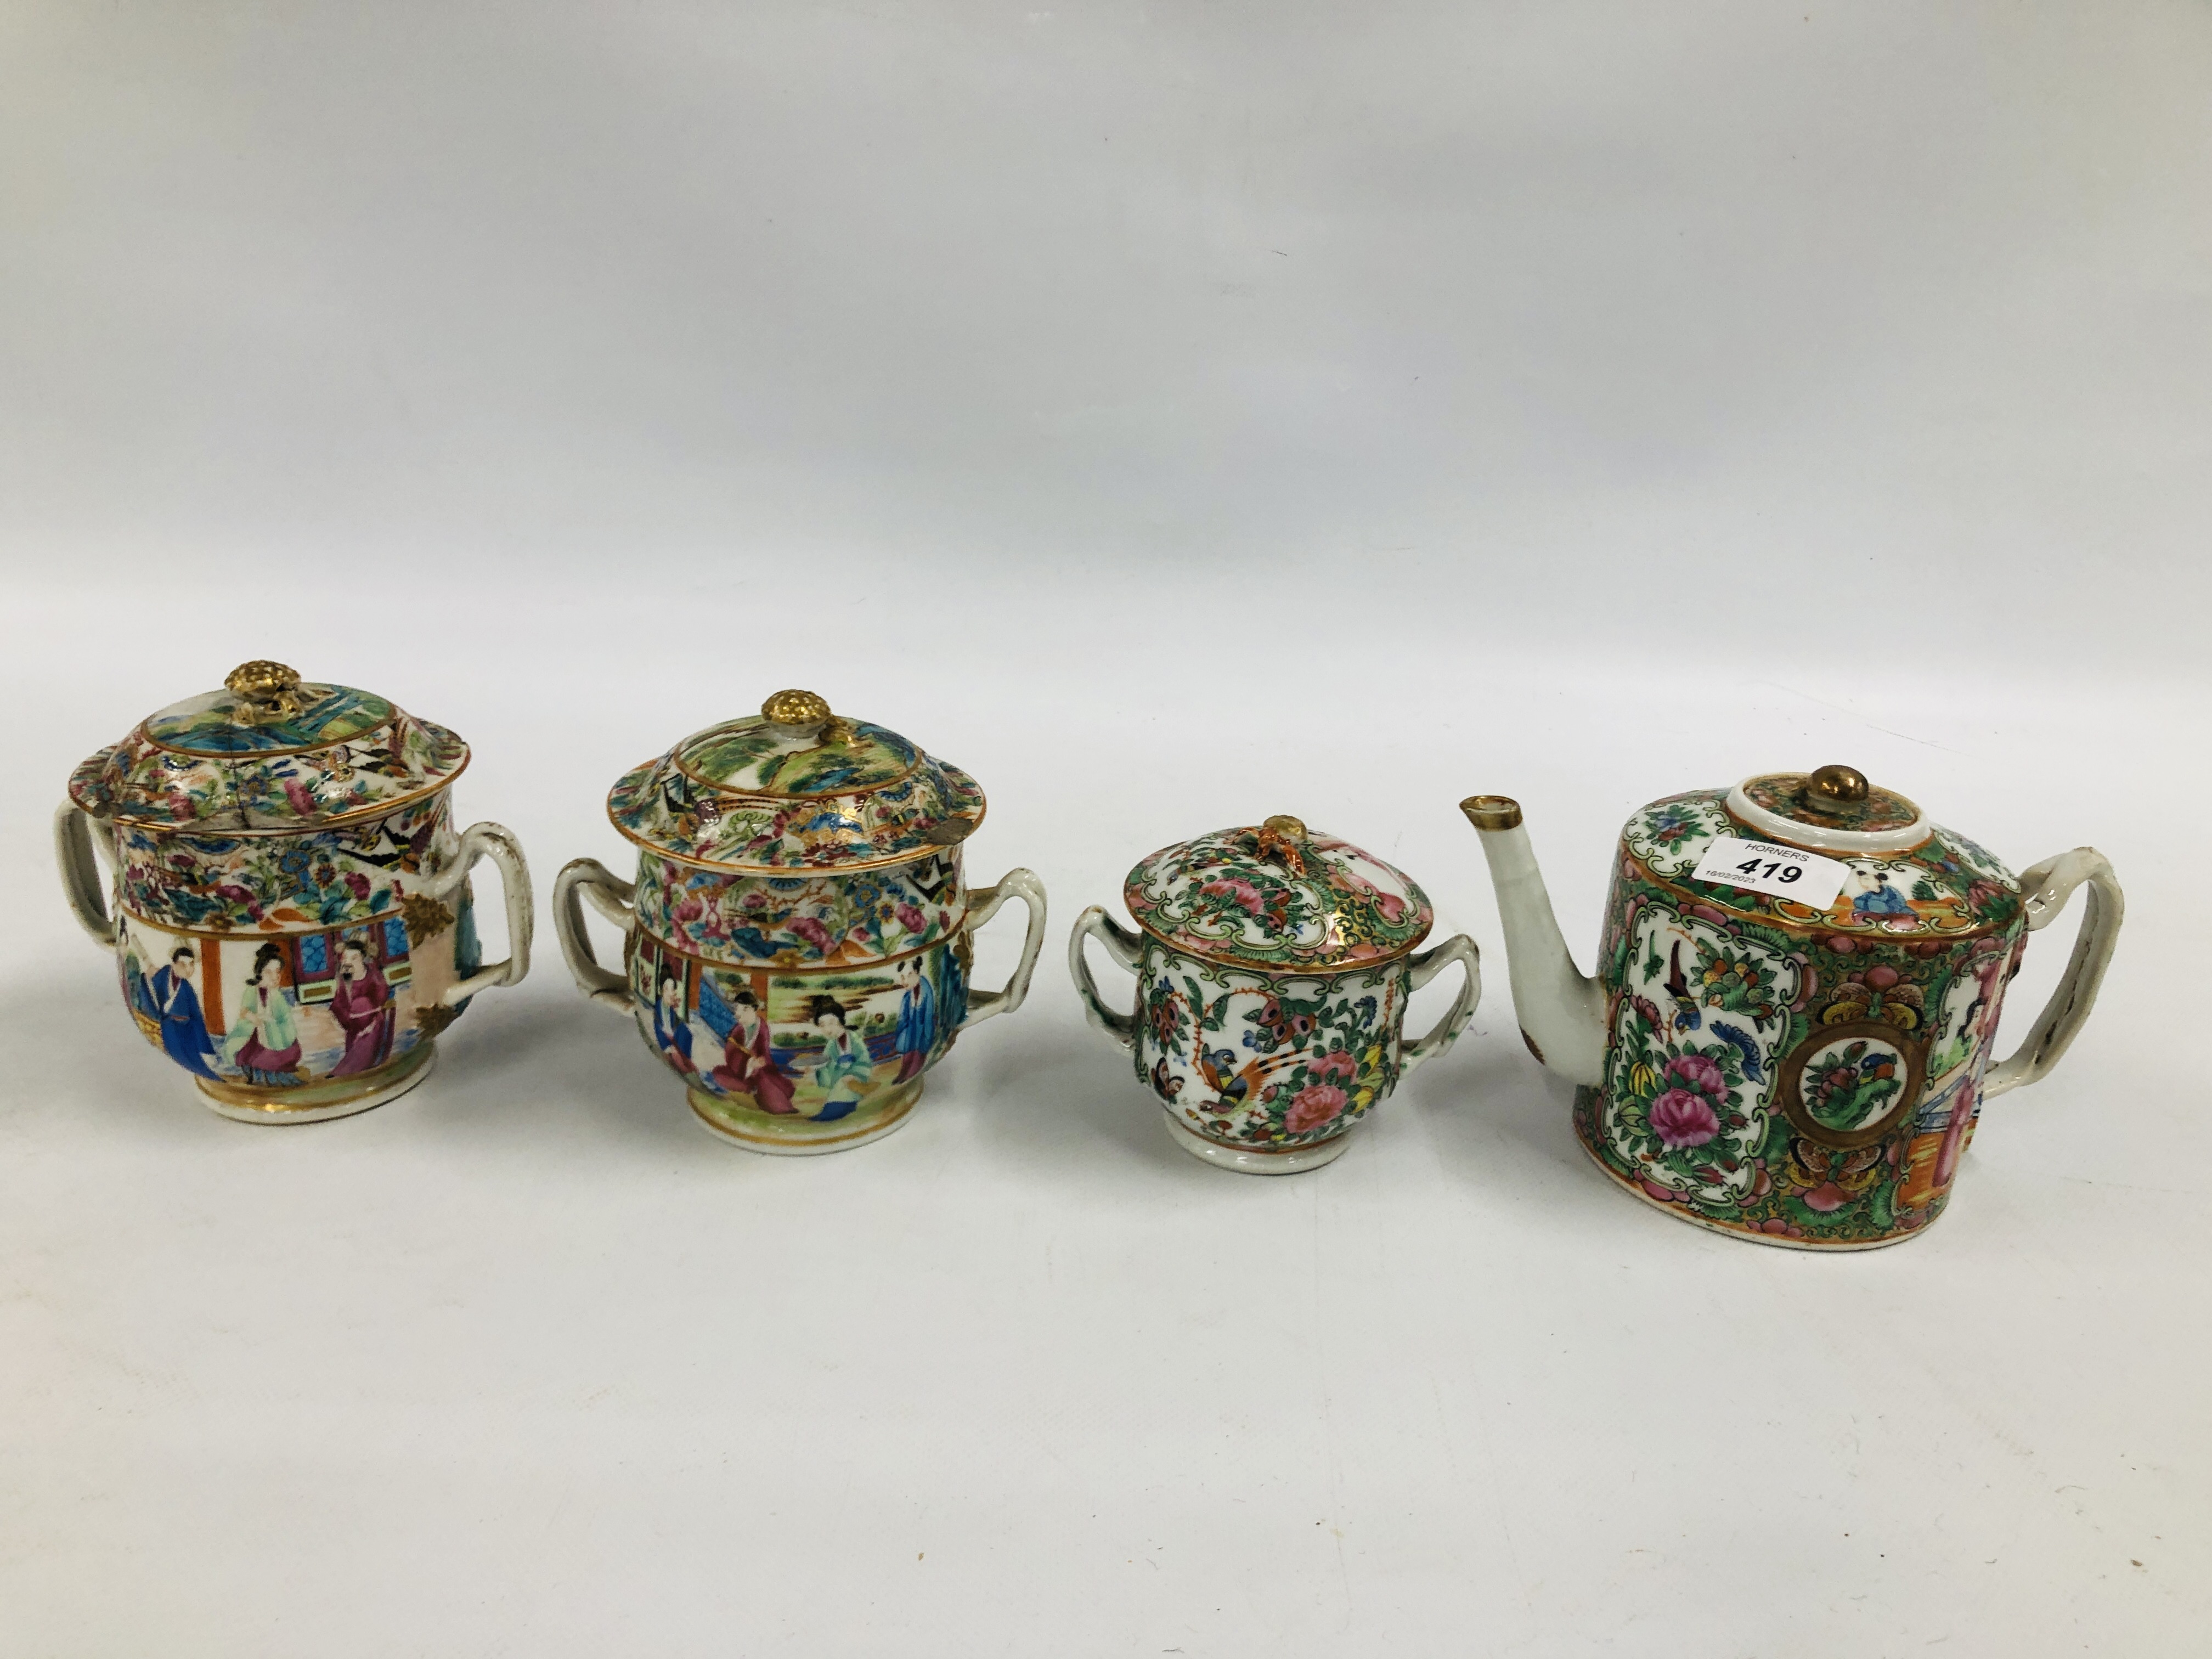 CANTONESE TEAPOT AND COVER ALONG WITH A SUGAR BASIN AND COVER AND A PAIR OF TWO HANDLED BOWLS AND